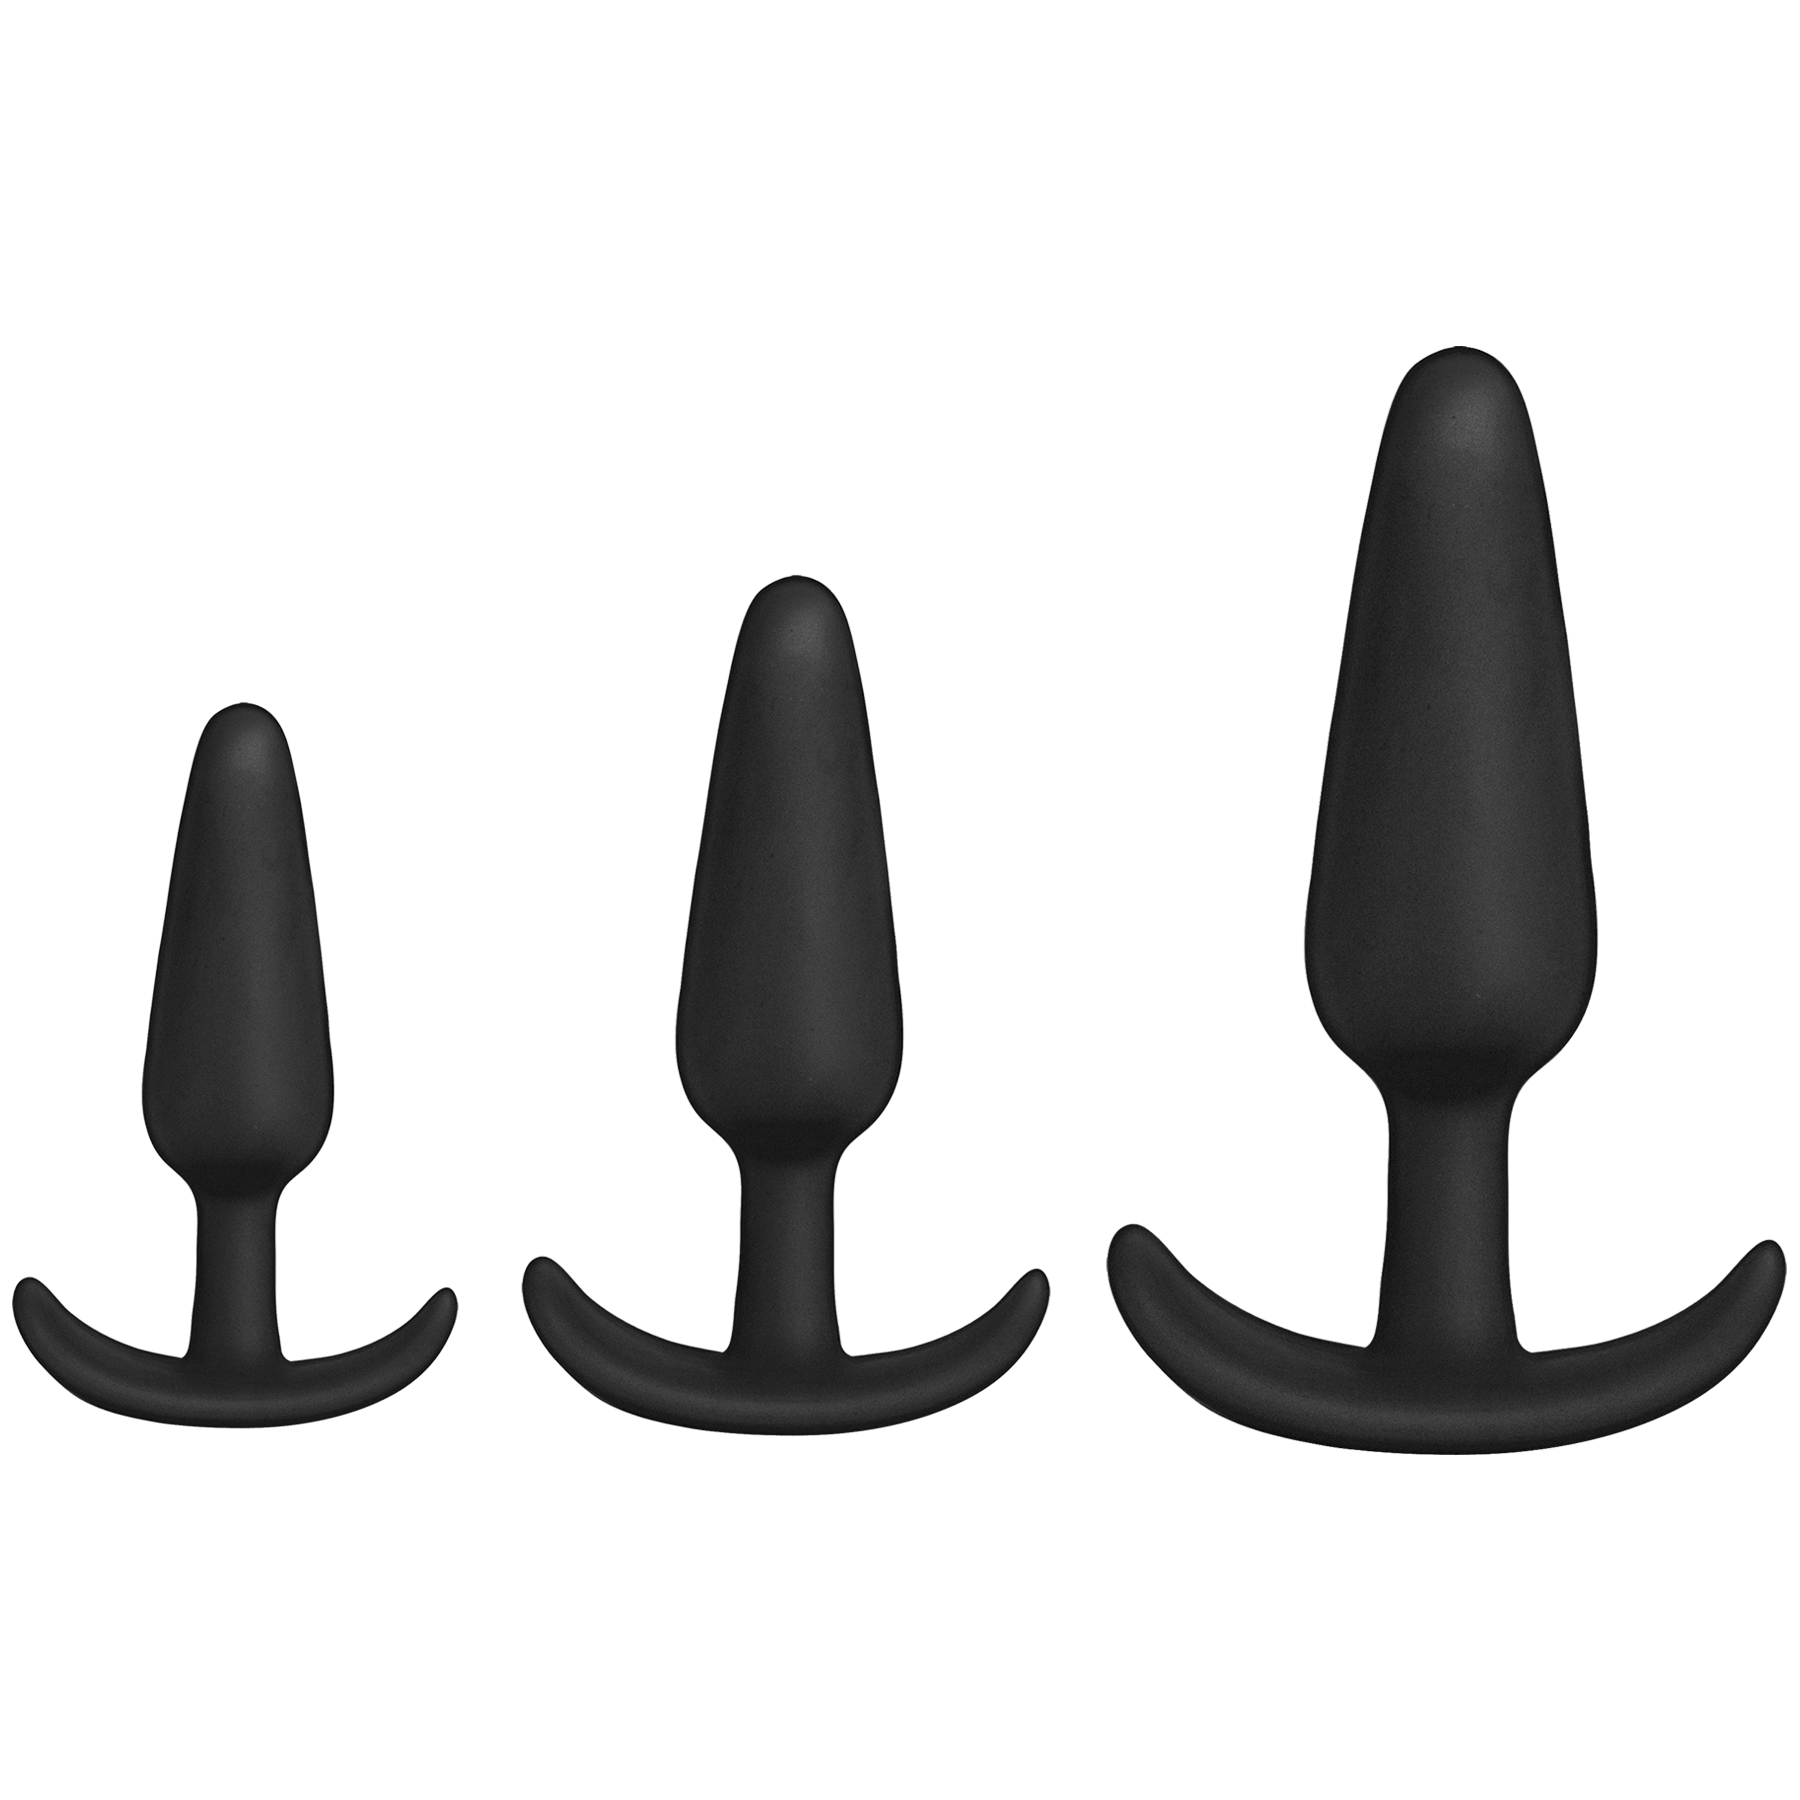 Mood Naughty 1 Trainer Set - Black - Thorn & Feather Sex Toy Canada